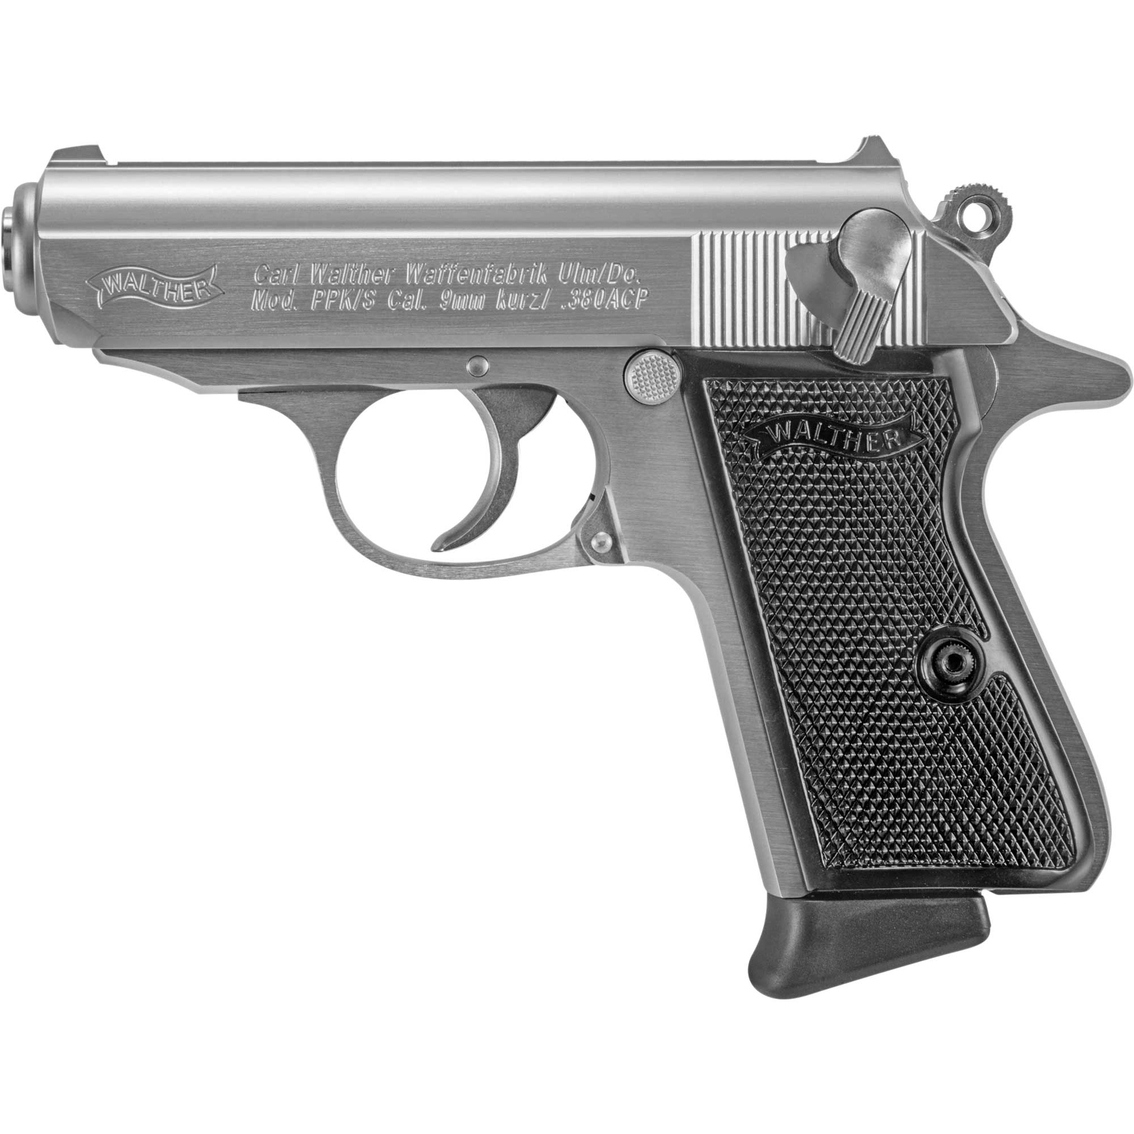 Walther PPK/S 380 ACP 3.35 in. Barrel 7 Rnd Stainless with Walnut Grips - Image 2 of 3